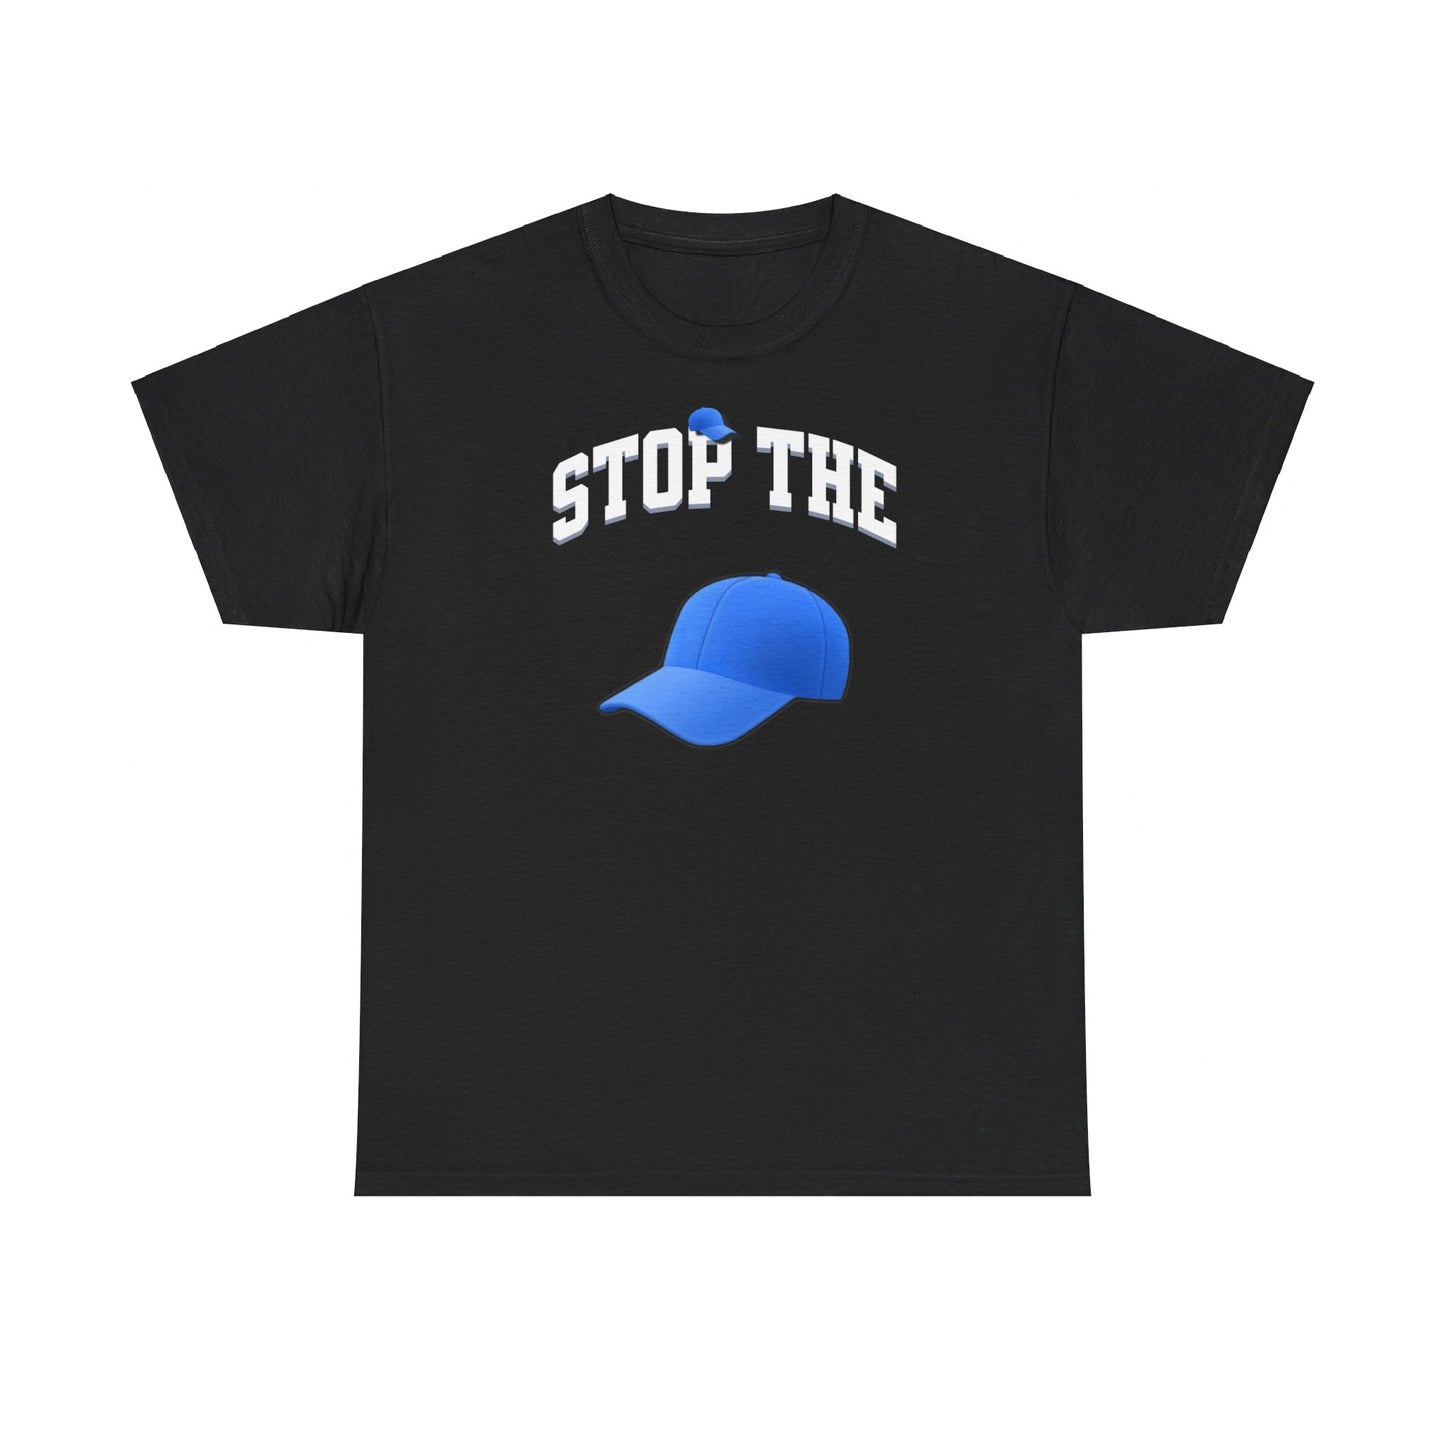 Stop The Cap T-Shirt out now! Ideal Gift for friends and family. Tiktok stop the cap Shirt, Capping Tshirt, Funny Meme Cap Clothing, Funny Tshirt, Meme T-Shirt, Cool Stylish Trendy clothing, shirt, Tiktok Capping shirt, Cap Emoji Apple, Stop the cap gift shirt for funny friends